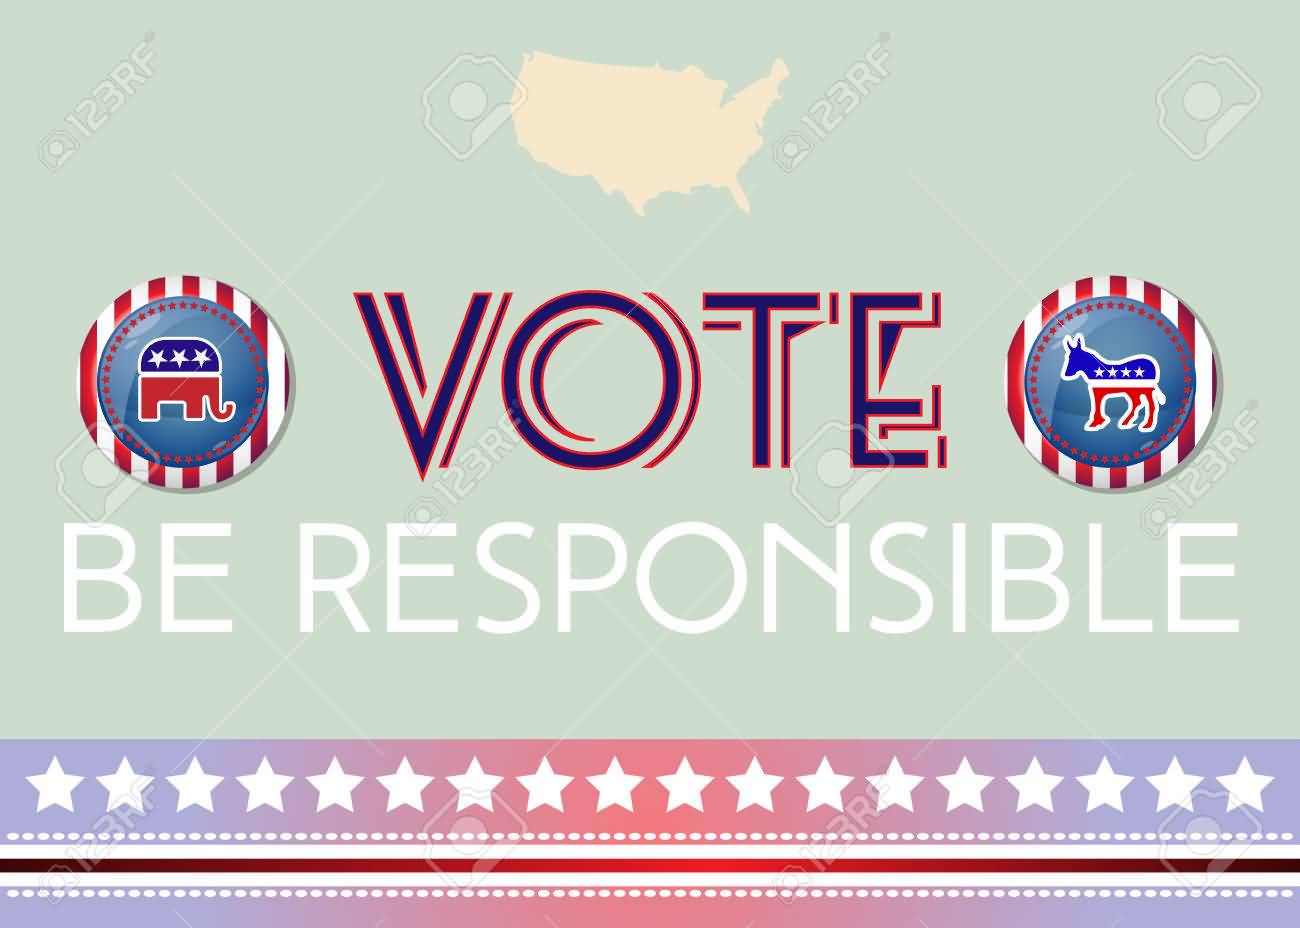 Vote Be Responsible On Election Day 2016 United States